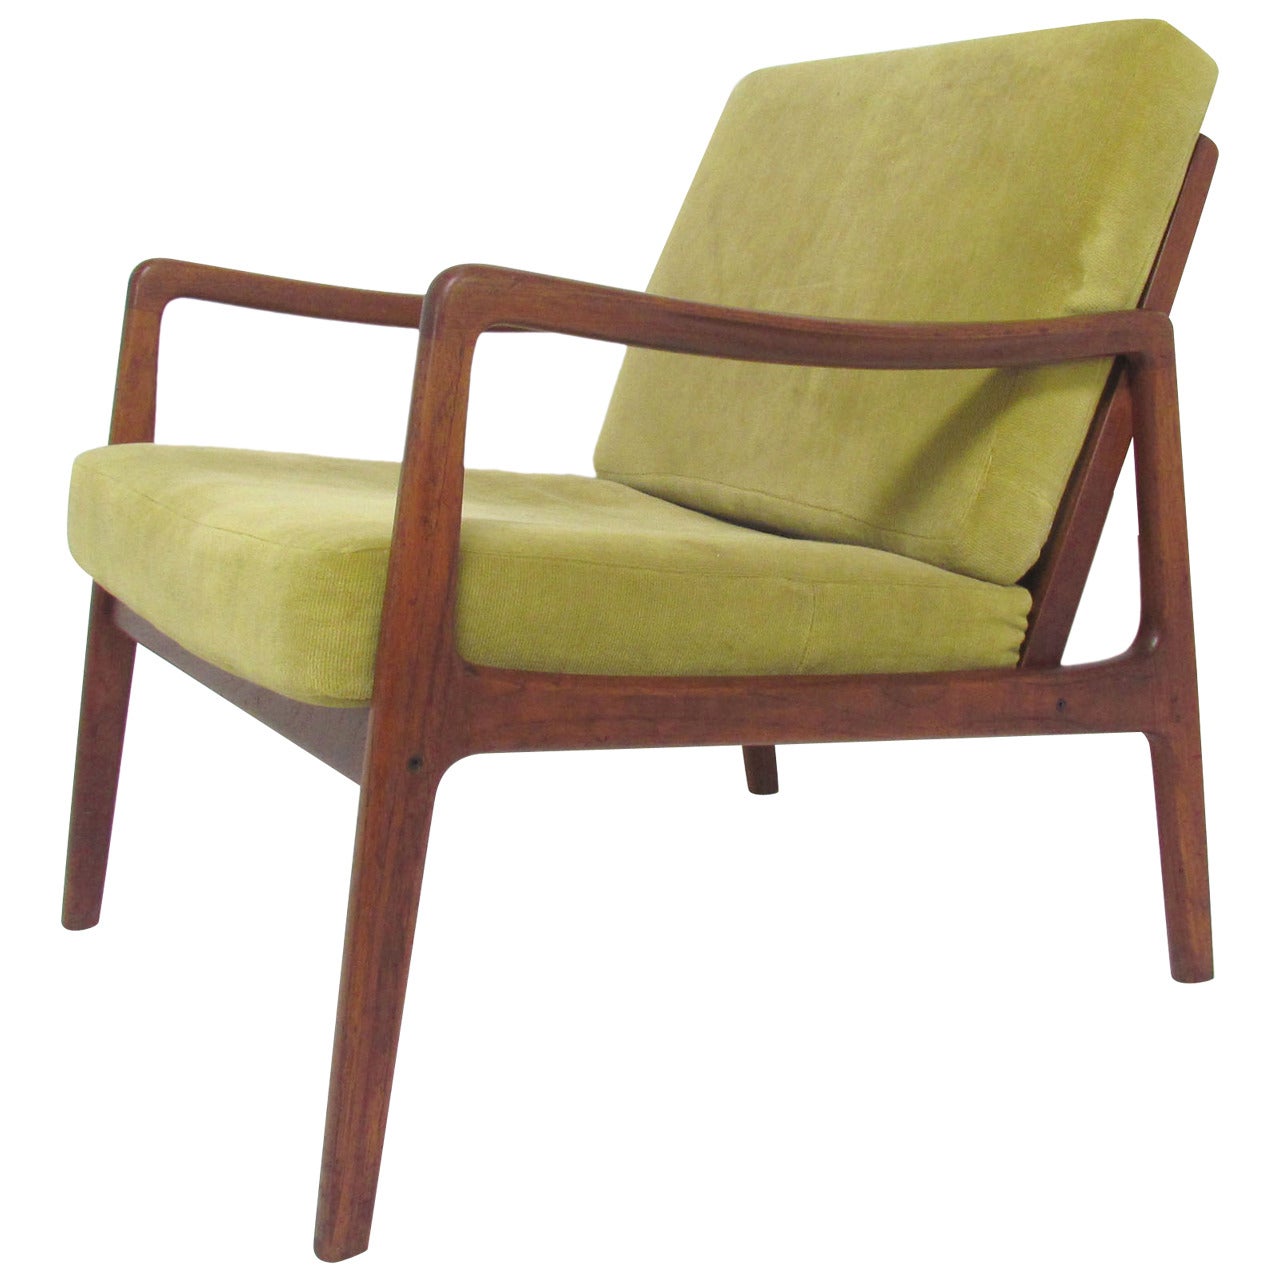 Classic Danish Teak Lounge Chair by Ole Wanscher for France & Son